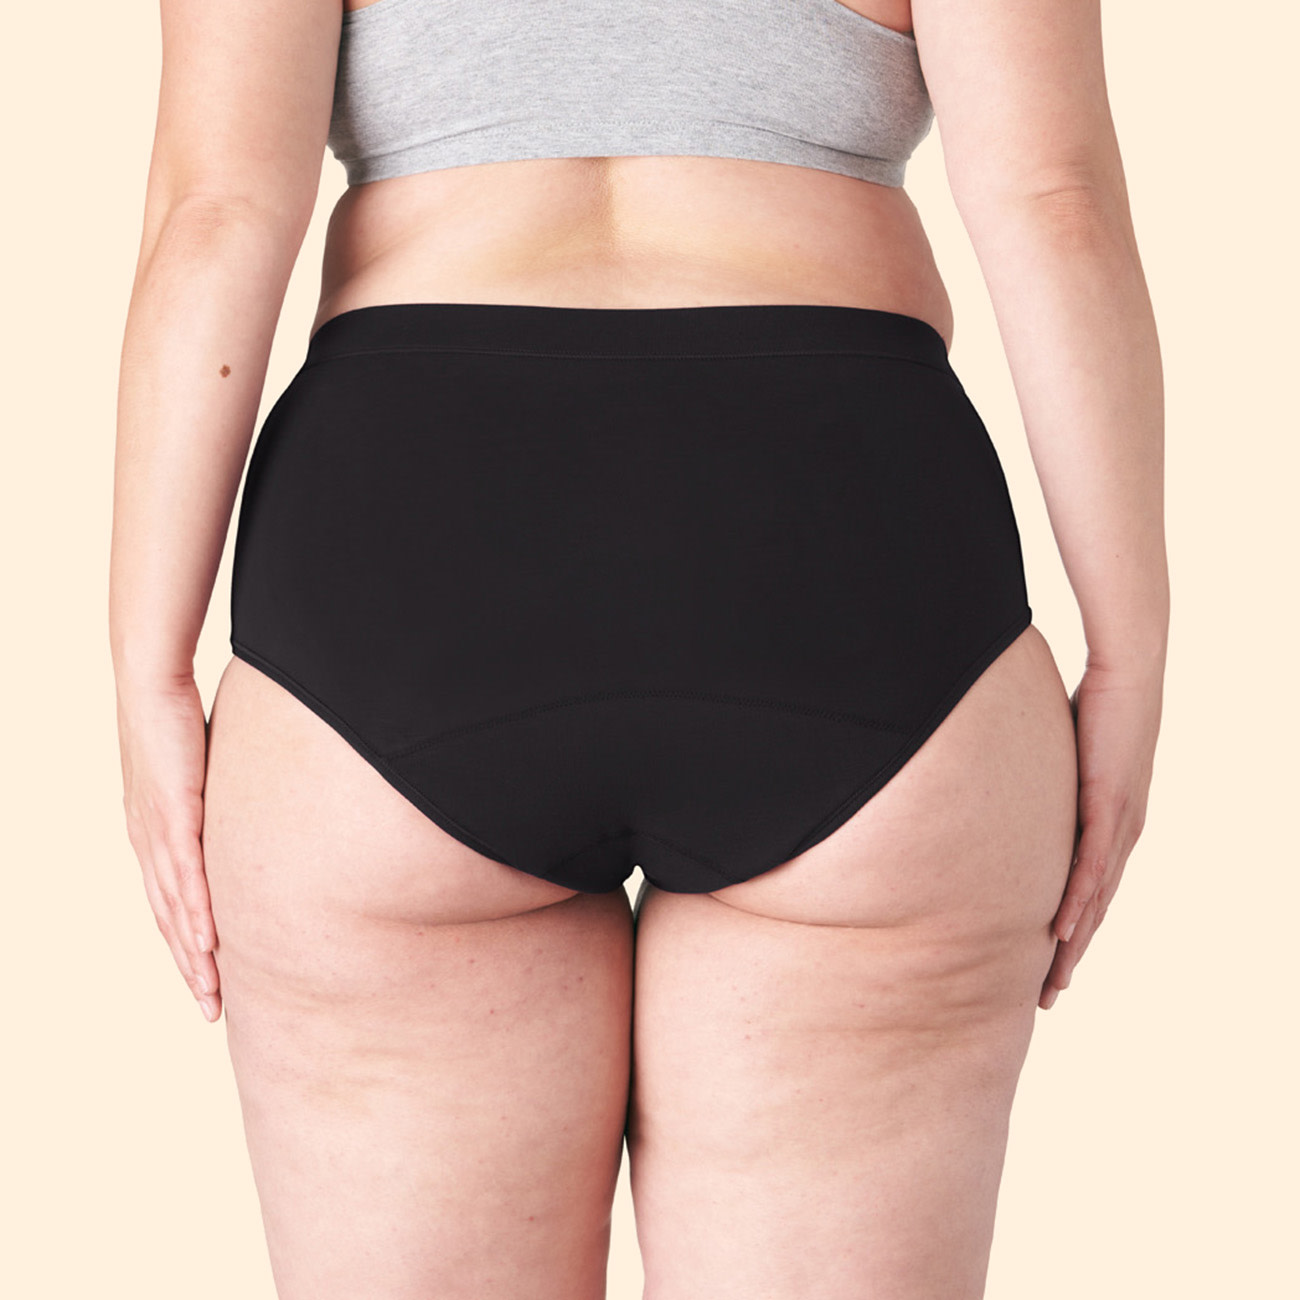  Thinx For All Hi-Waist 2-Pack Period Underwear For